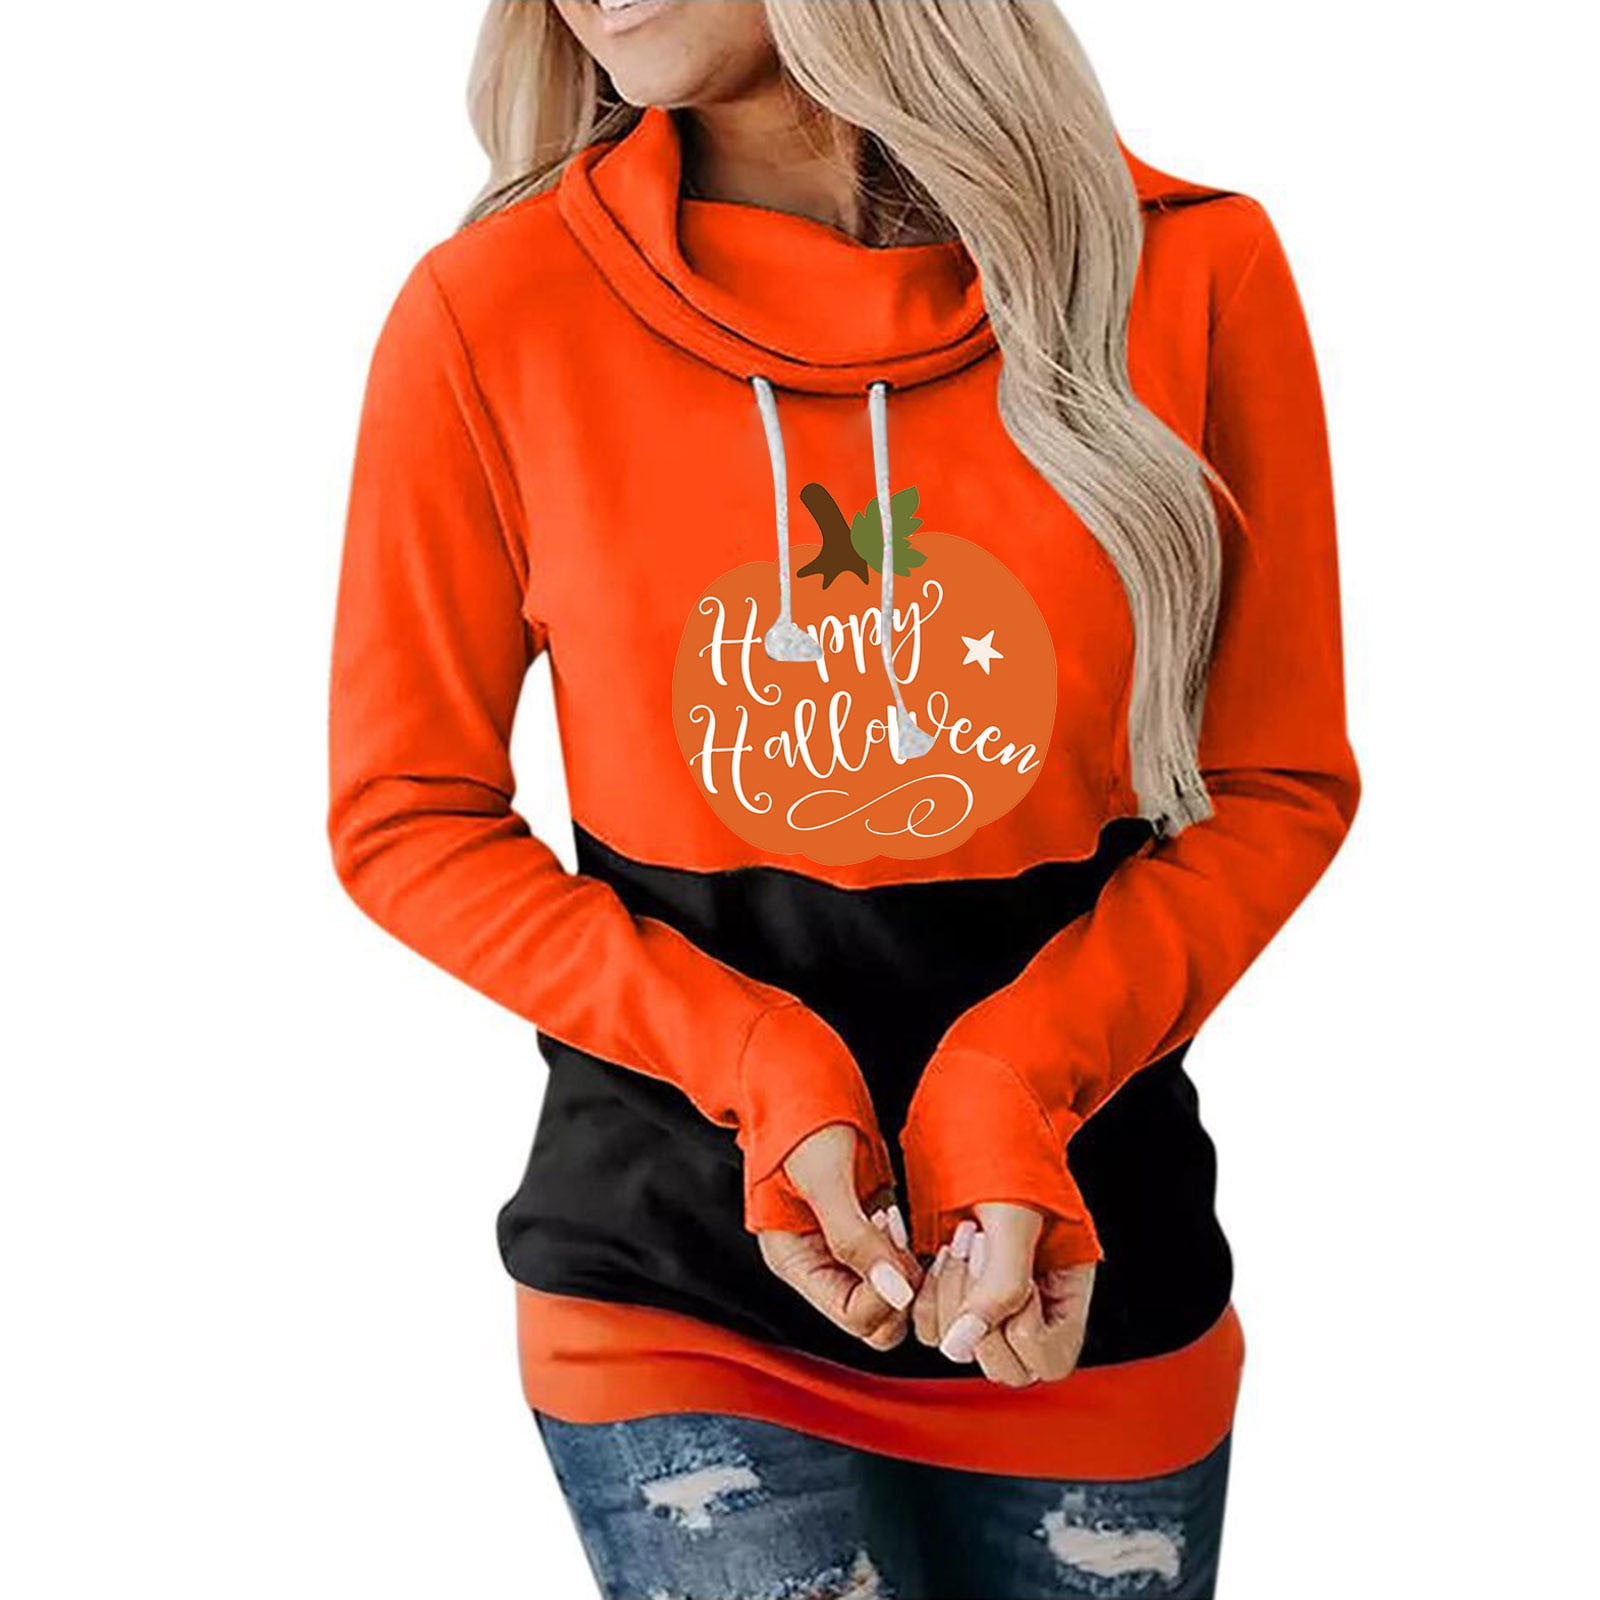 Fesfesfes Women Hooded Casual Halloween Printed Long Sleeve Blouse Pile  Collar Pullover Tops Sweatershirt Plus Size Clearance $10 